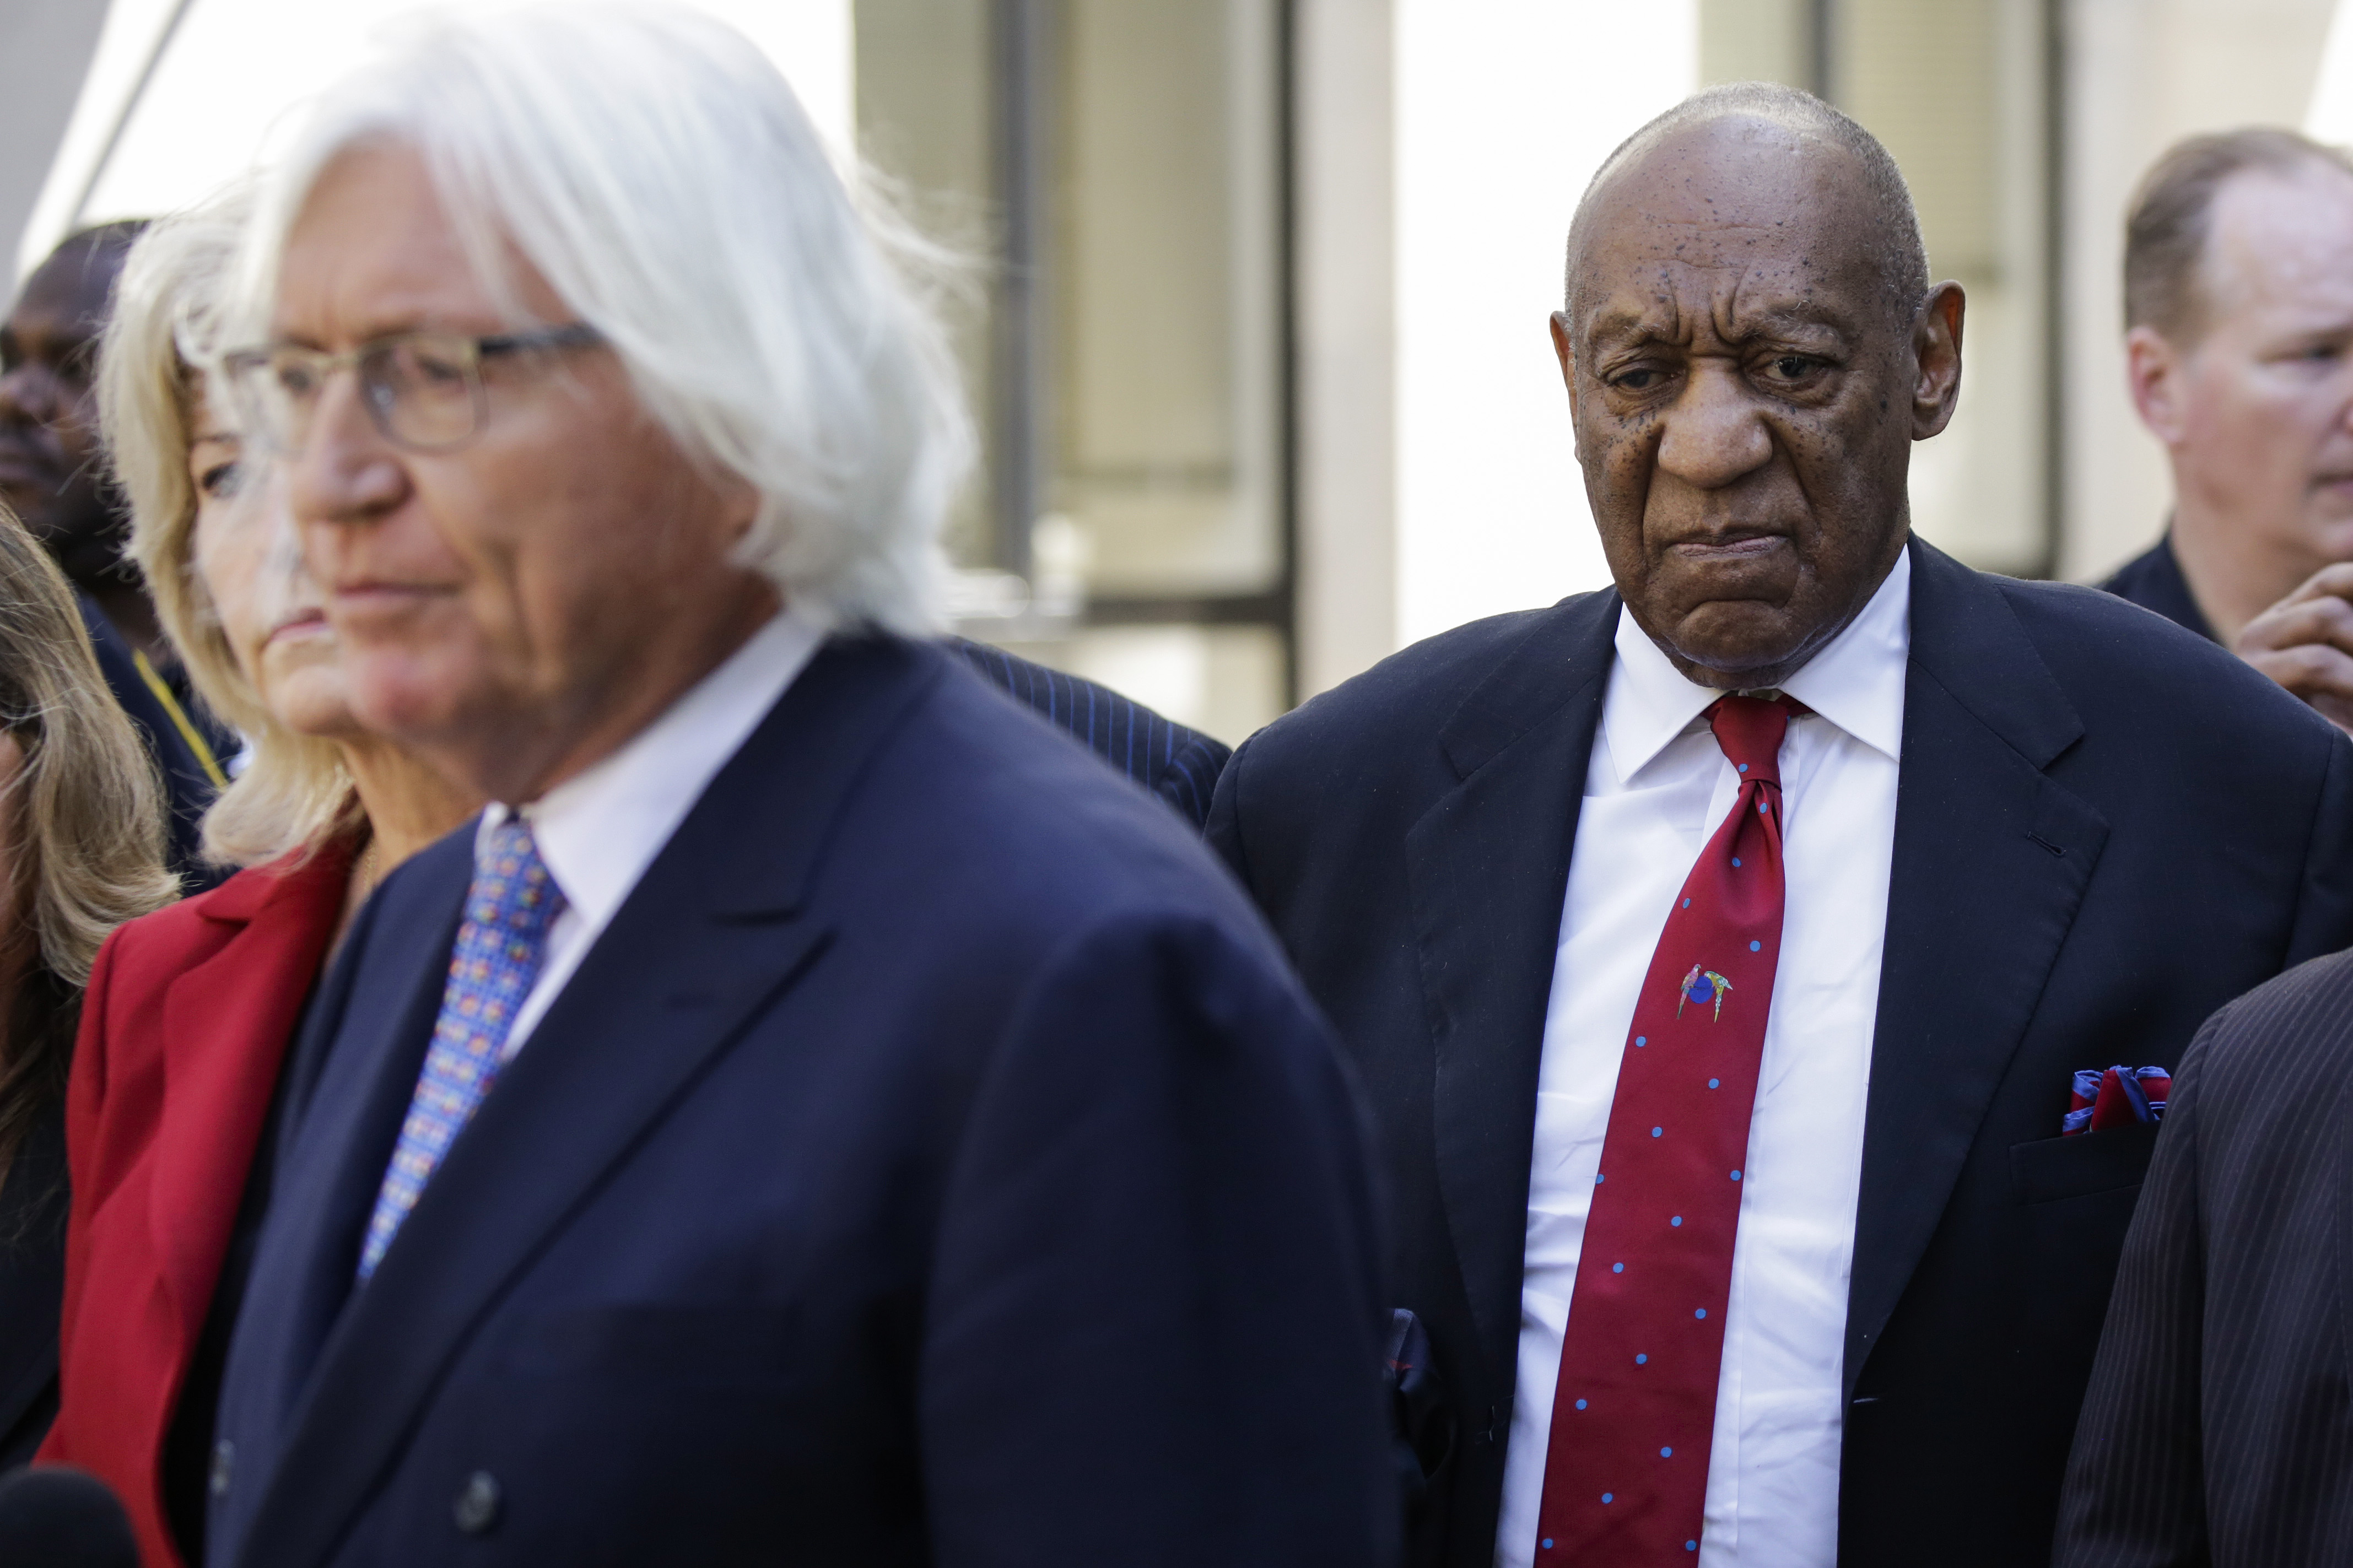 Actor and comedian Bill Cosby comes out of the courthouse after being found guilty in the retrial of his sexual assault case at the Montgomery County Courthouse in Norristown, Pennsylvania on April 26, 2018. (Dominick Reuter—AFP/Getty Images)